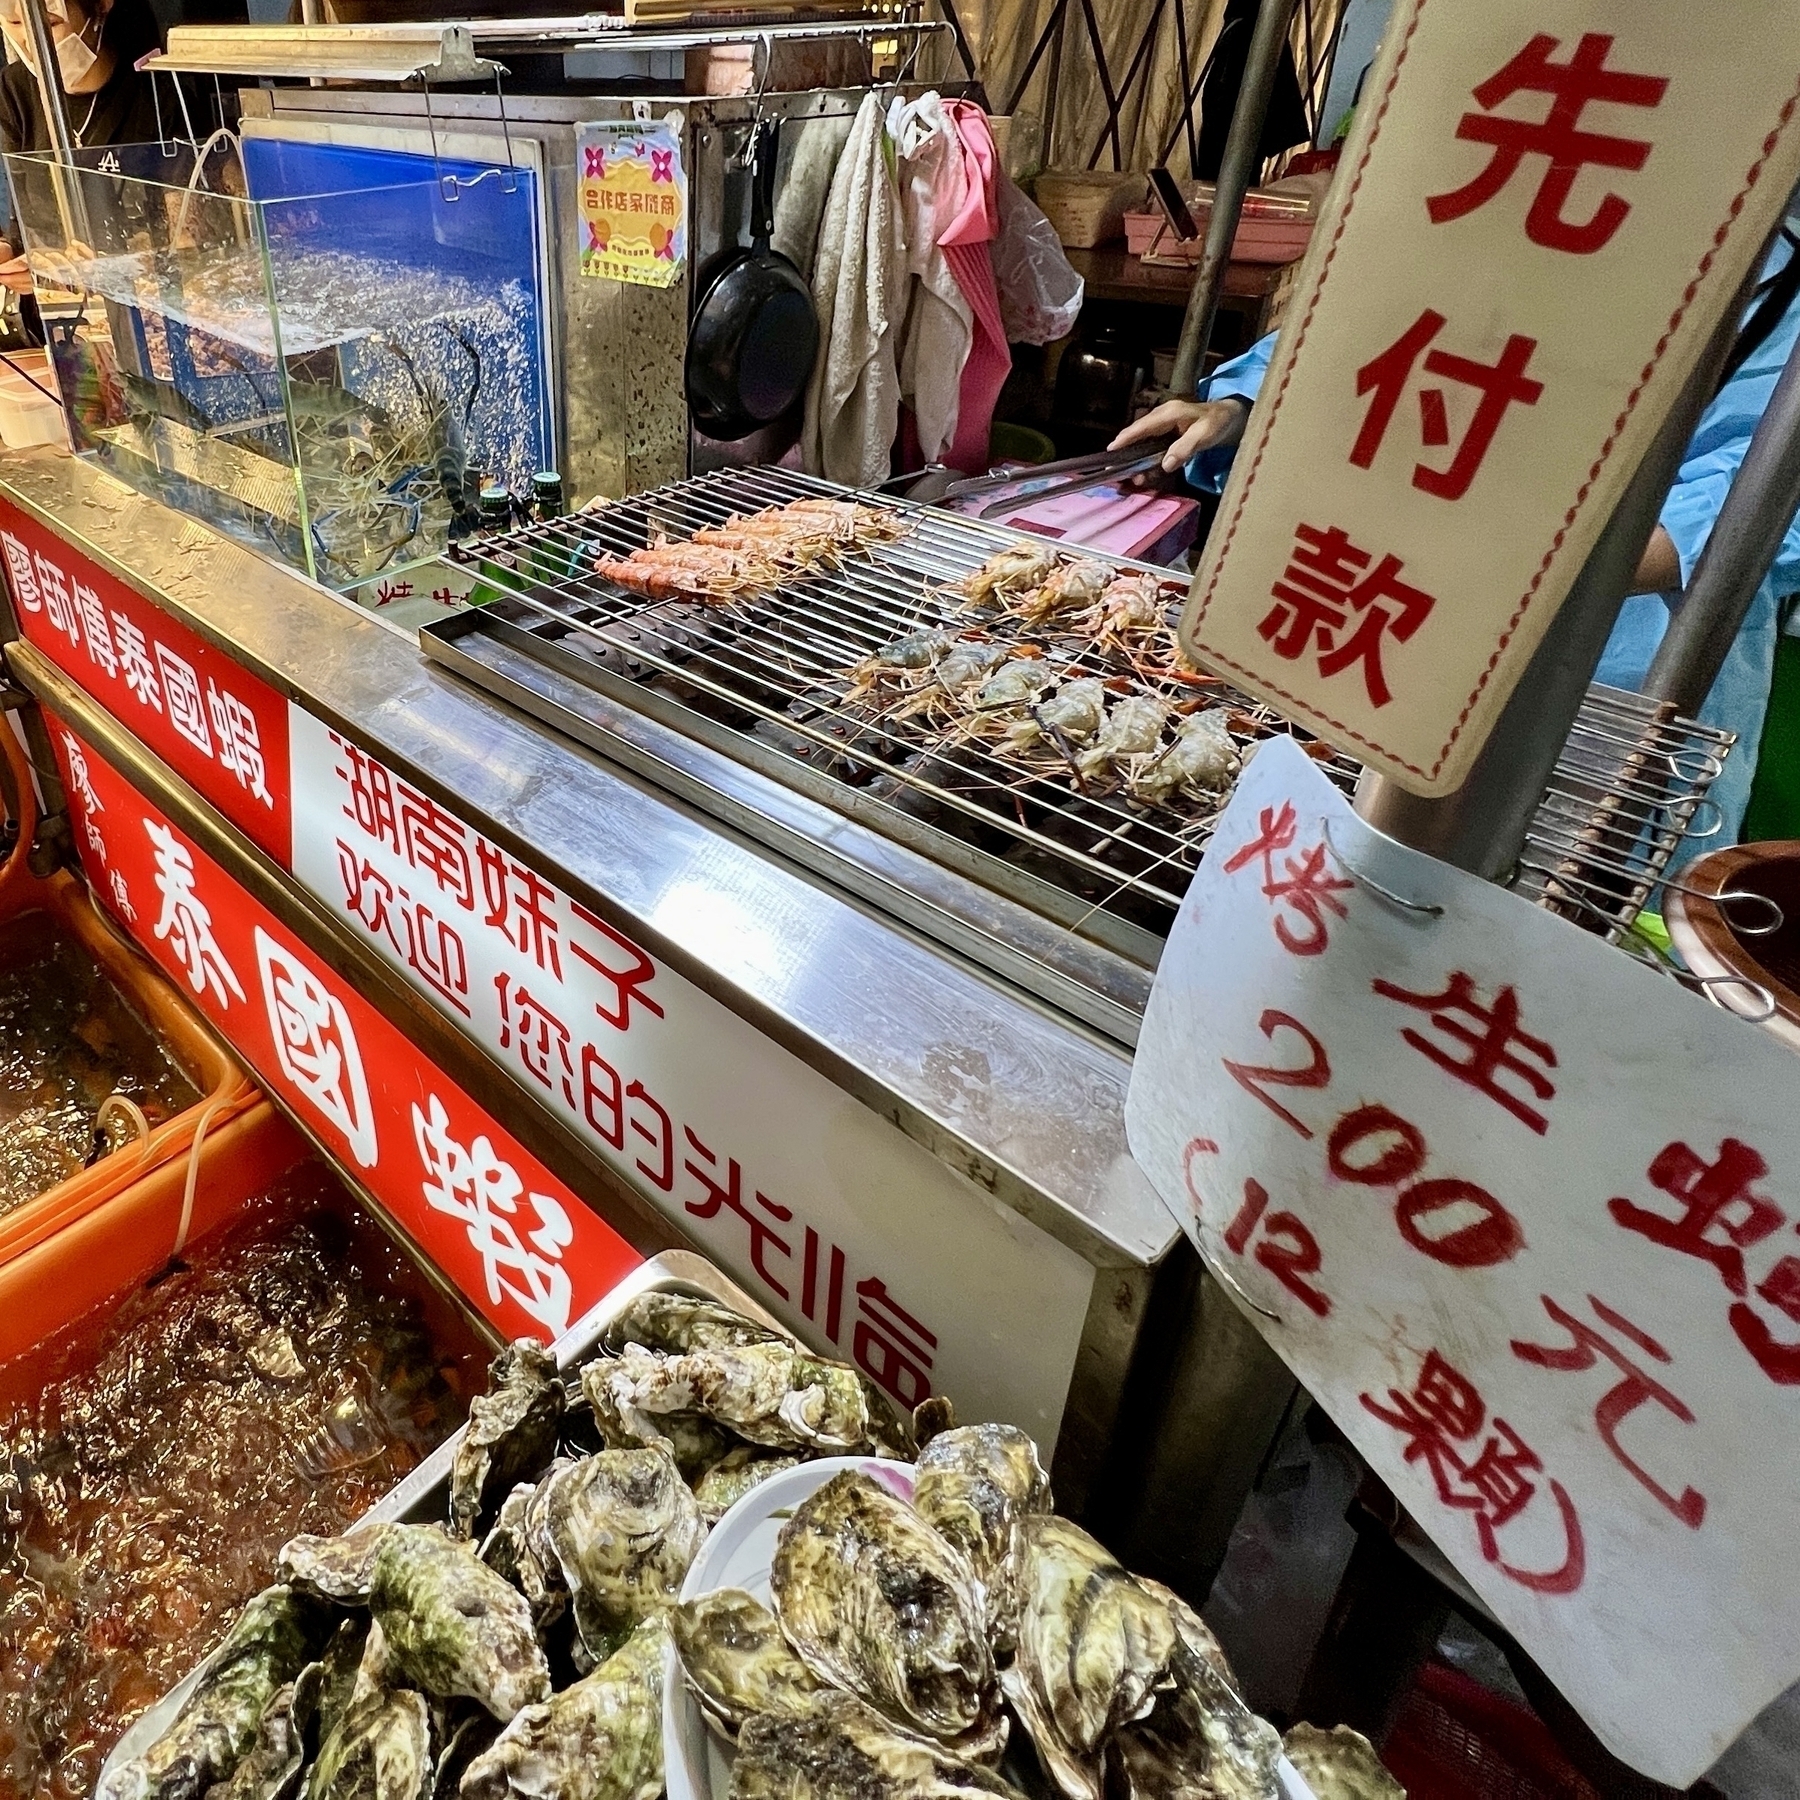 A roasted giant shrimp stand. A pile of clams are out front of the shop stall